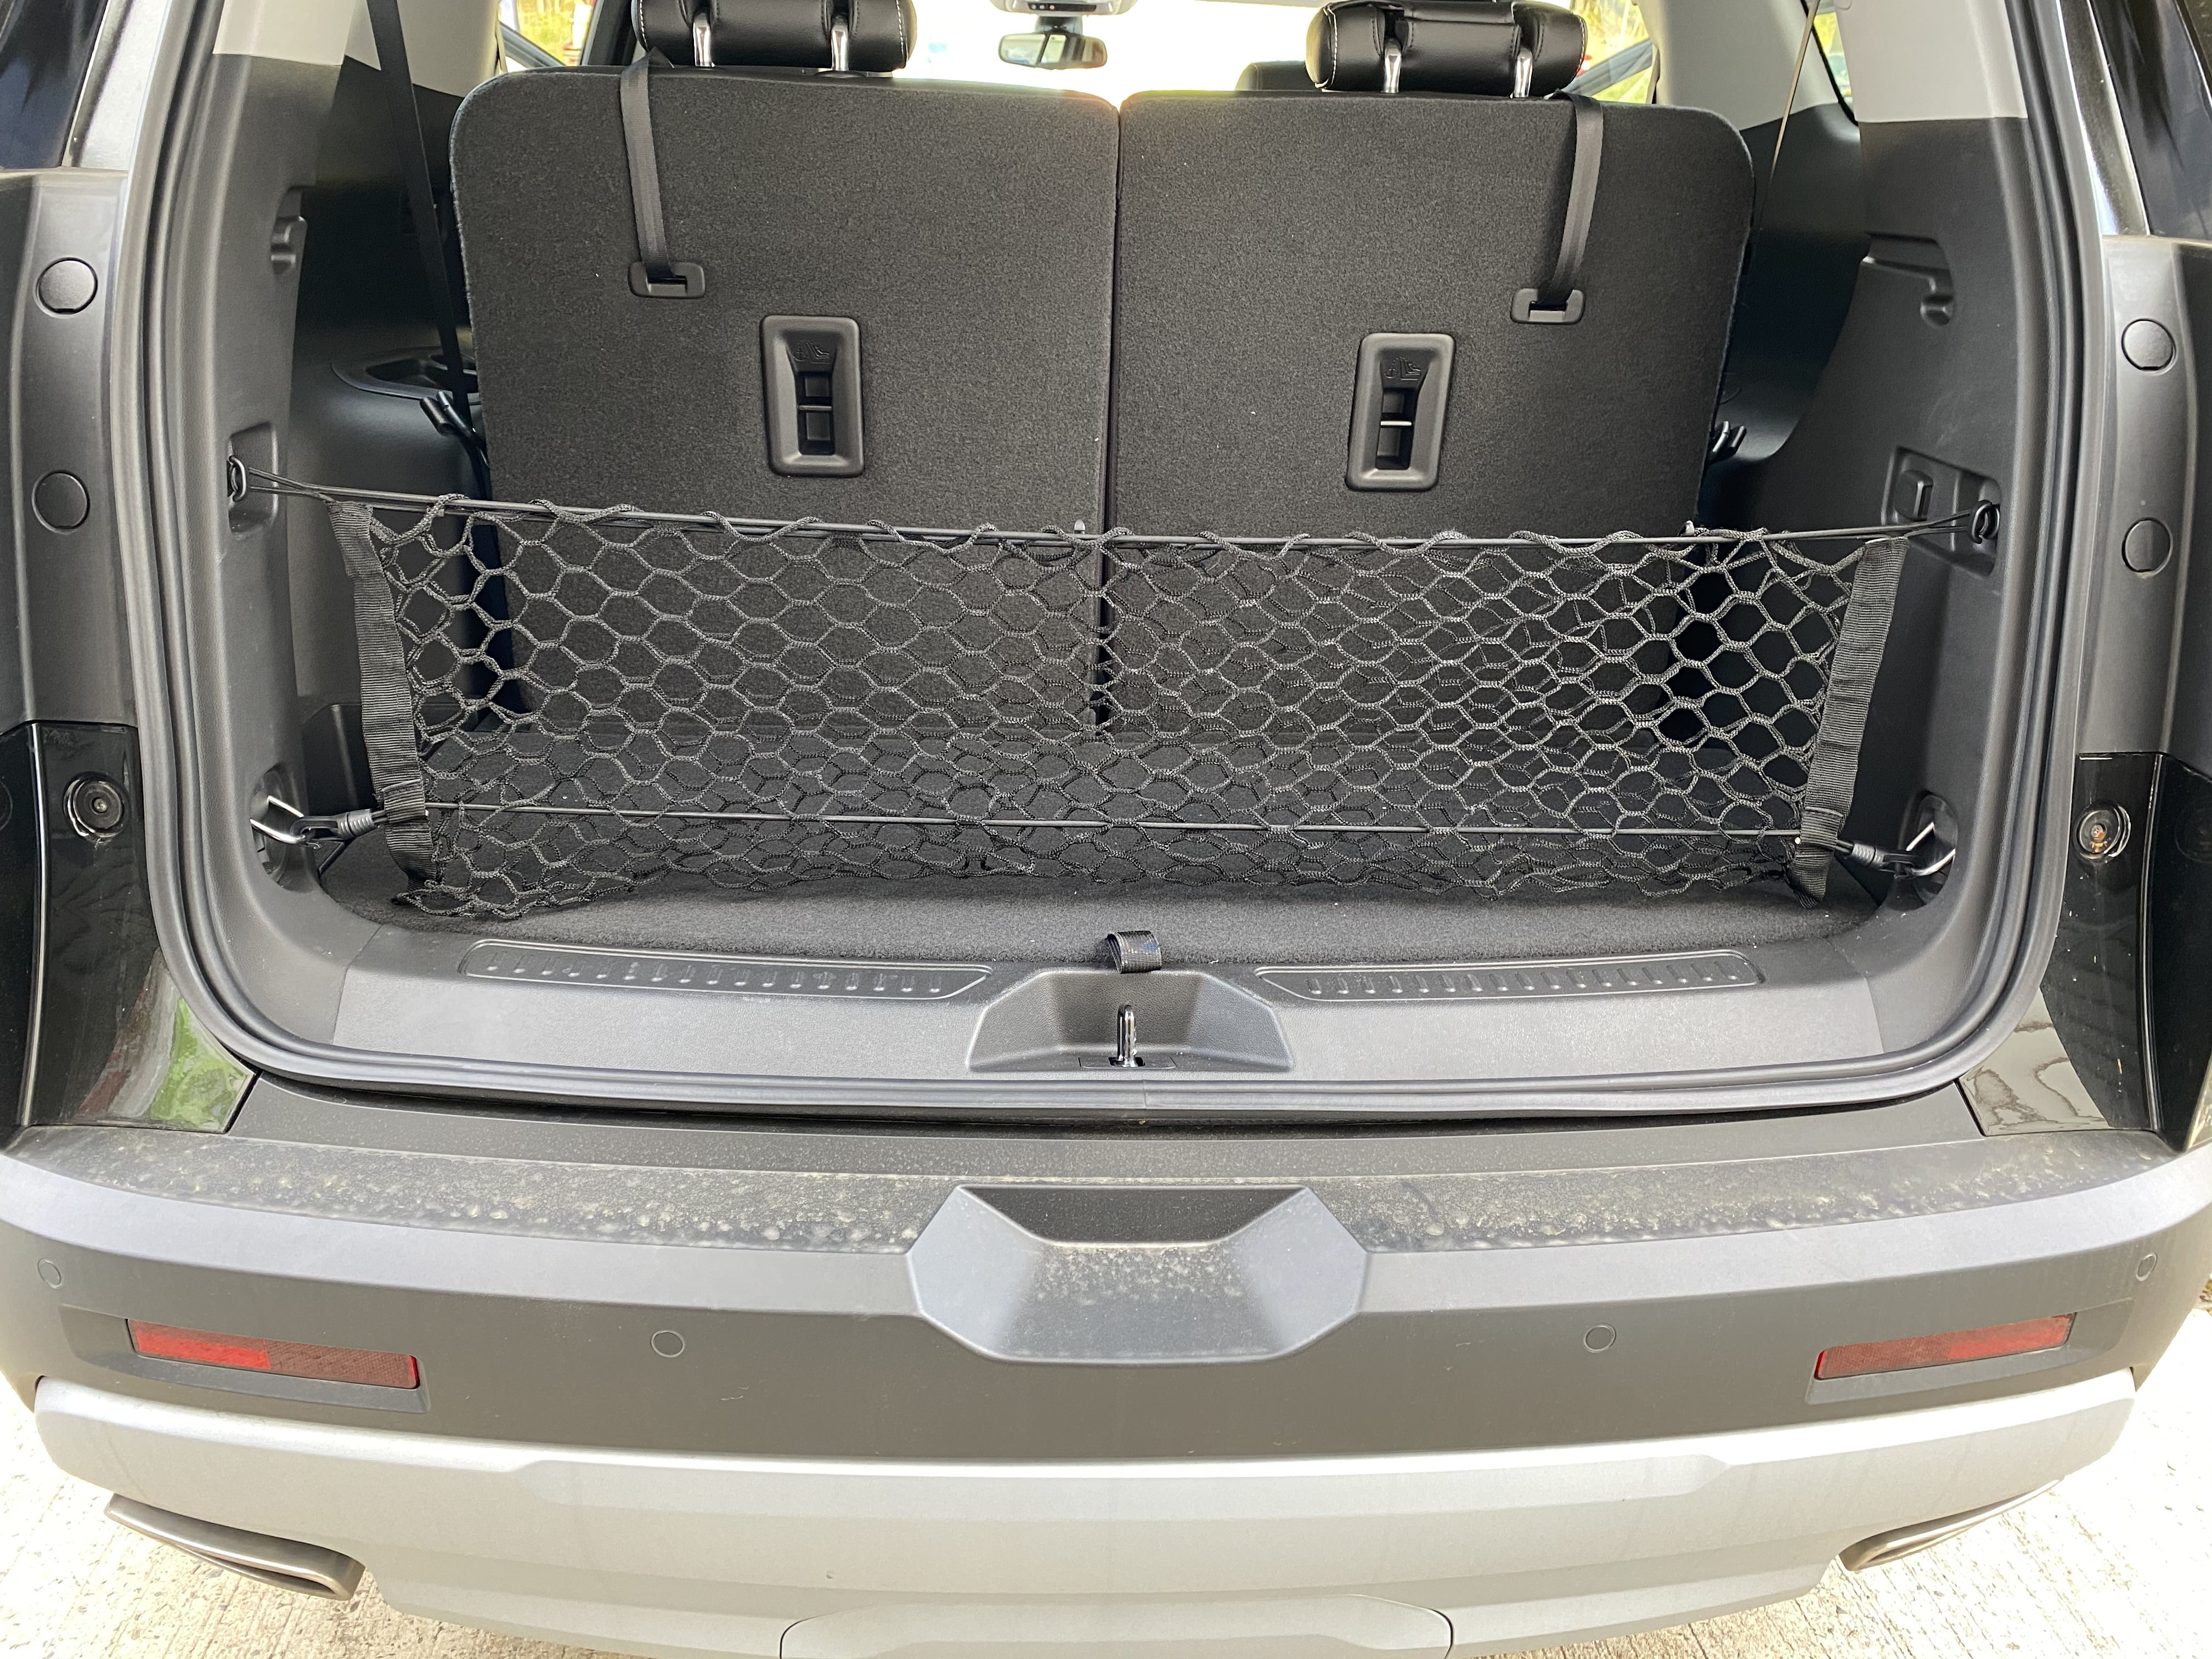 TRUNK AREA ENVELOPE STYLE VERTICAL CARGO NET FOR CHEVY TRAVERSE 2018-2020 NEW